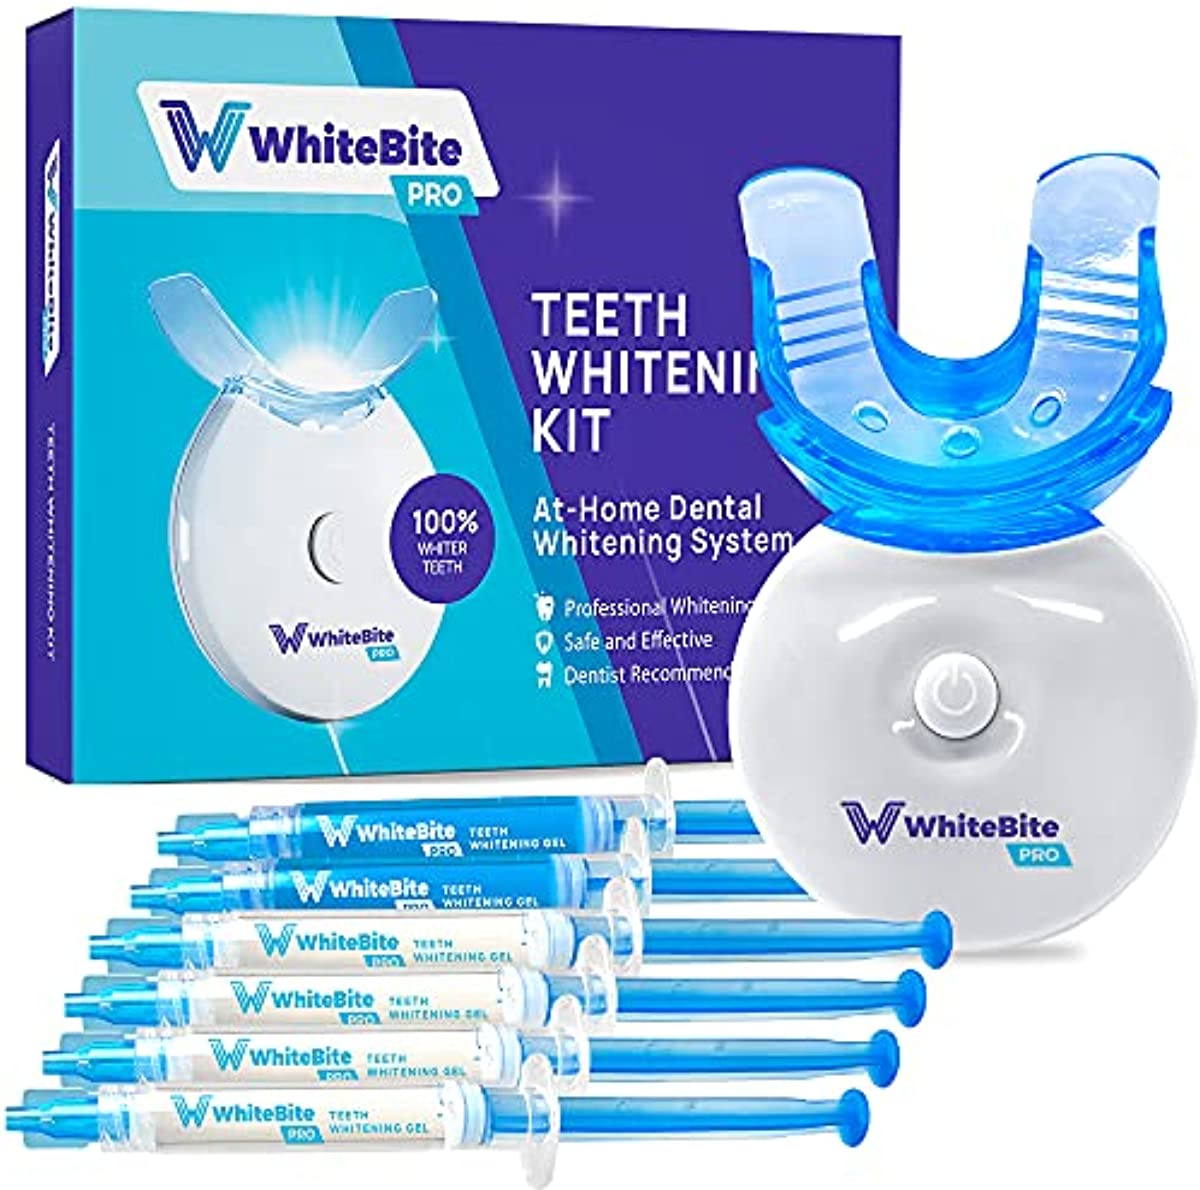 Whitebite Pro Teeth Whitening Kit with LED Light for Sensitive Teeth, Tooth Whitening System with 35{6759d95606d5803cfadd0253beece9061060cabe9c677495a71be97ab37f03a7} Carbamide Peroxide, (4)3ml Gel Syringes, (2)Remineralization Gel, and Mouth Tray, 7 Piece Set